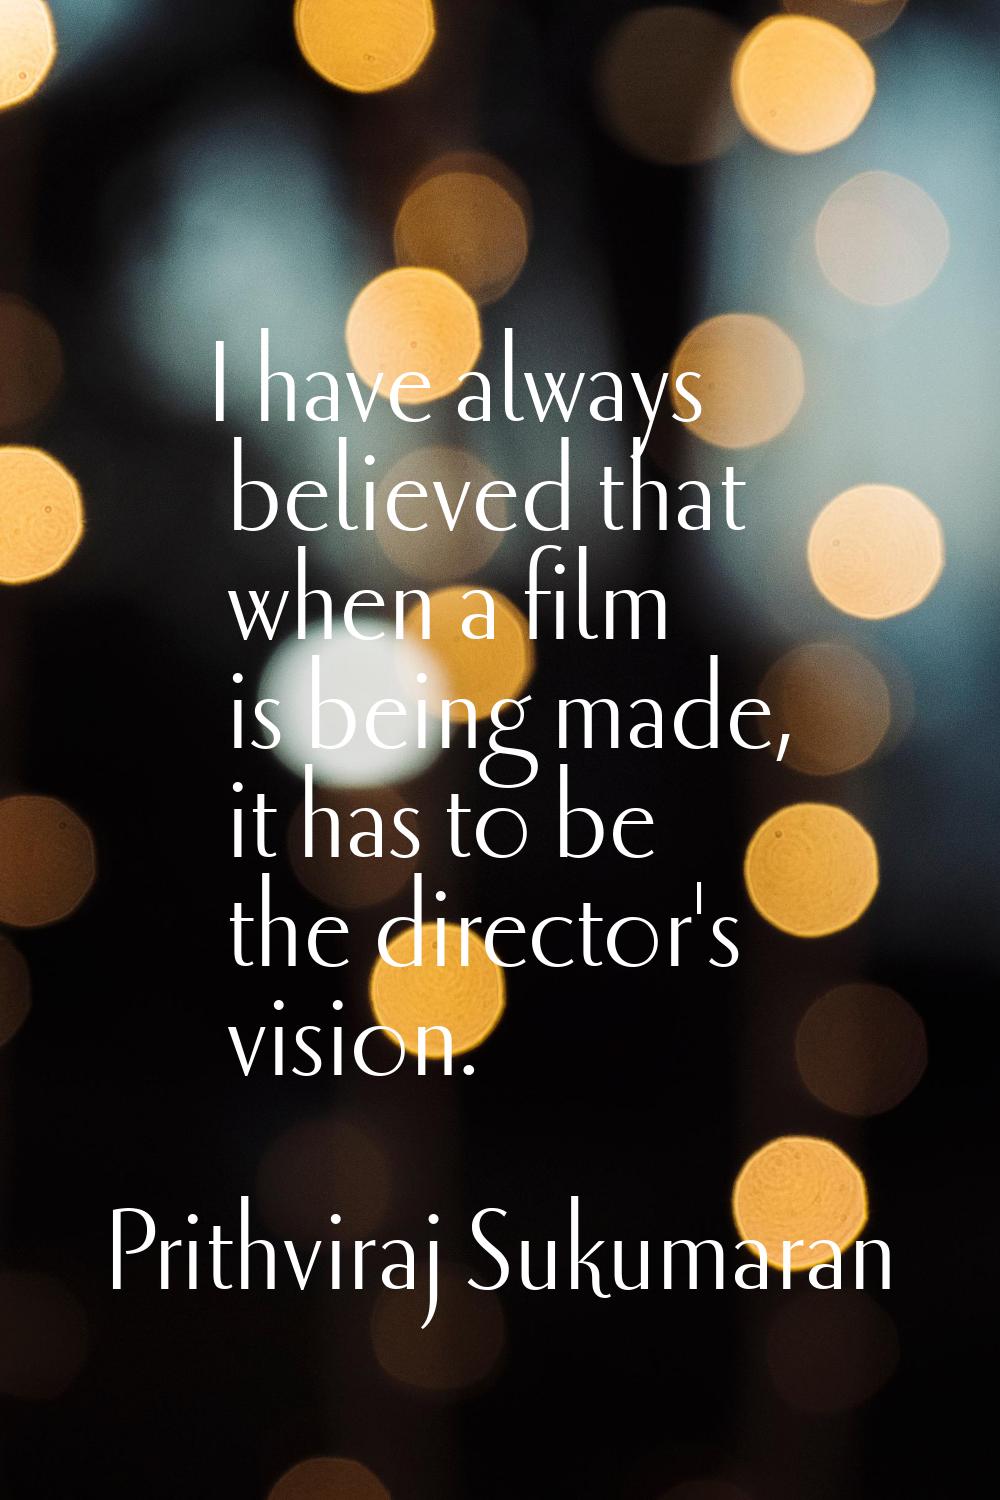 I have always believed that when a film is being made, it has to be the director's vision.